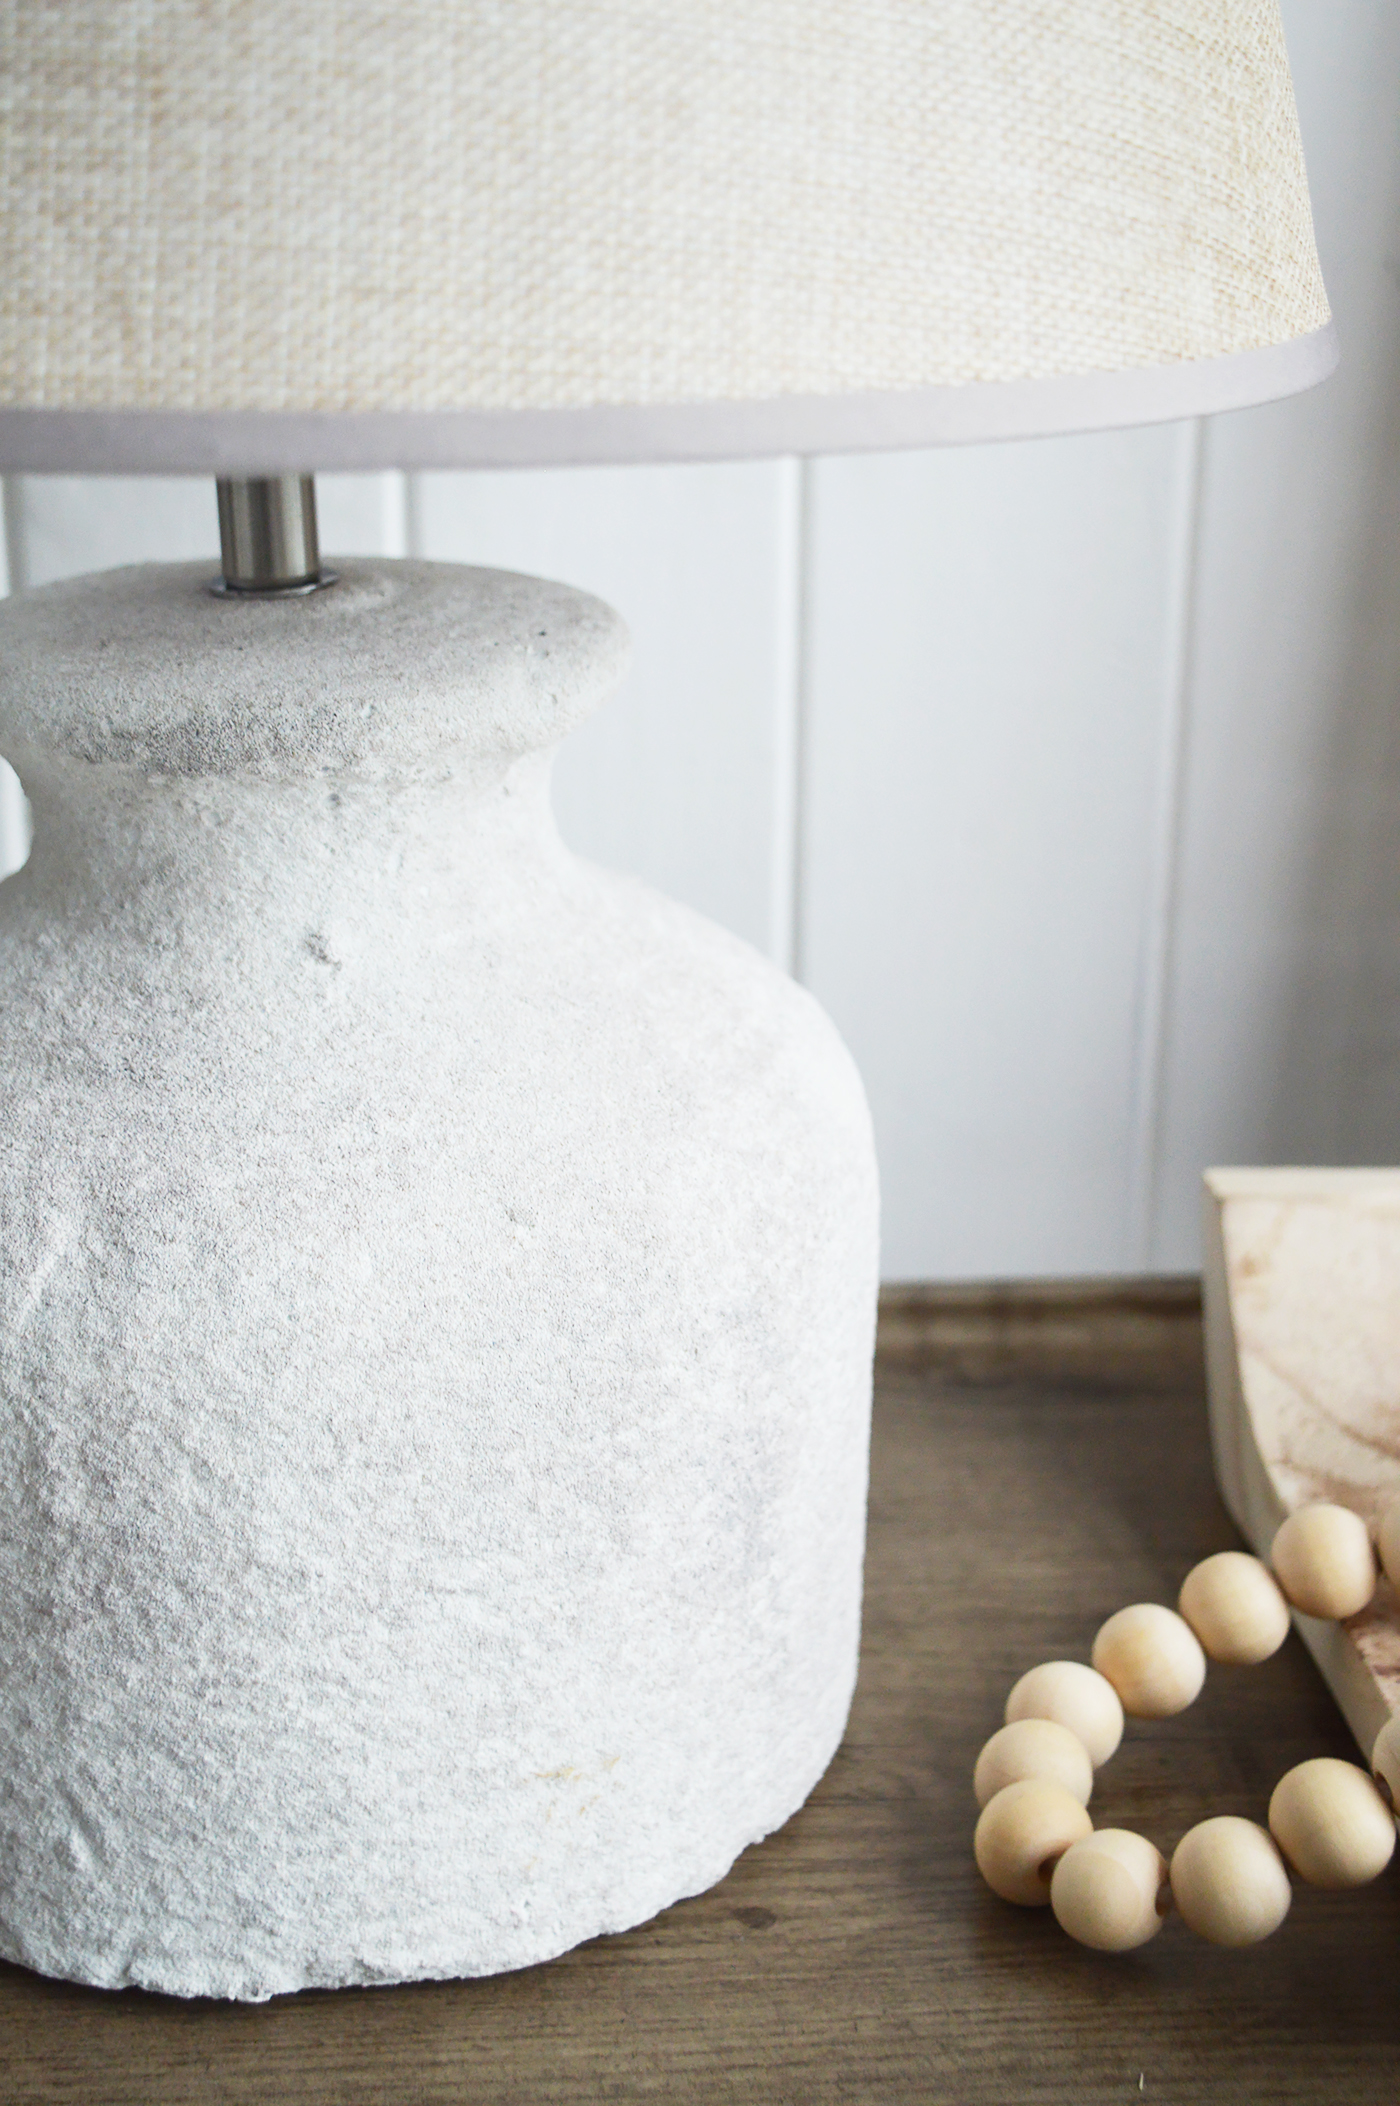 Barnstead Pale Grey Stone Lamp from The White Lighthouse Furniture. A lovely table lamp for bedside table or living room or bedroom furniture. New England style table lamps for country, coastal, citu and farmhouse styled homes